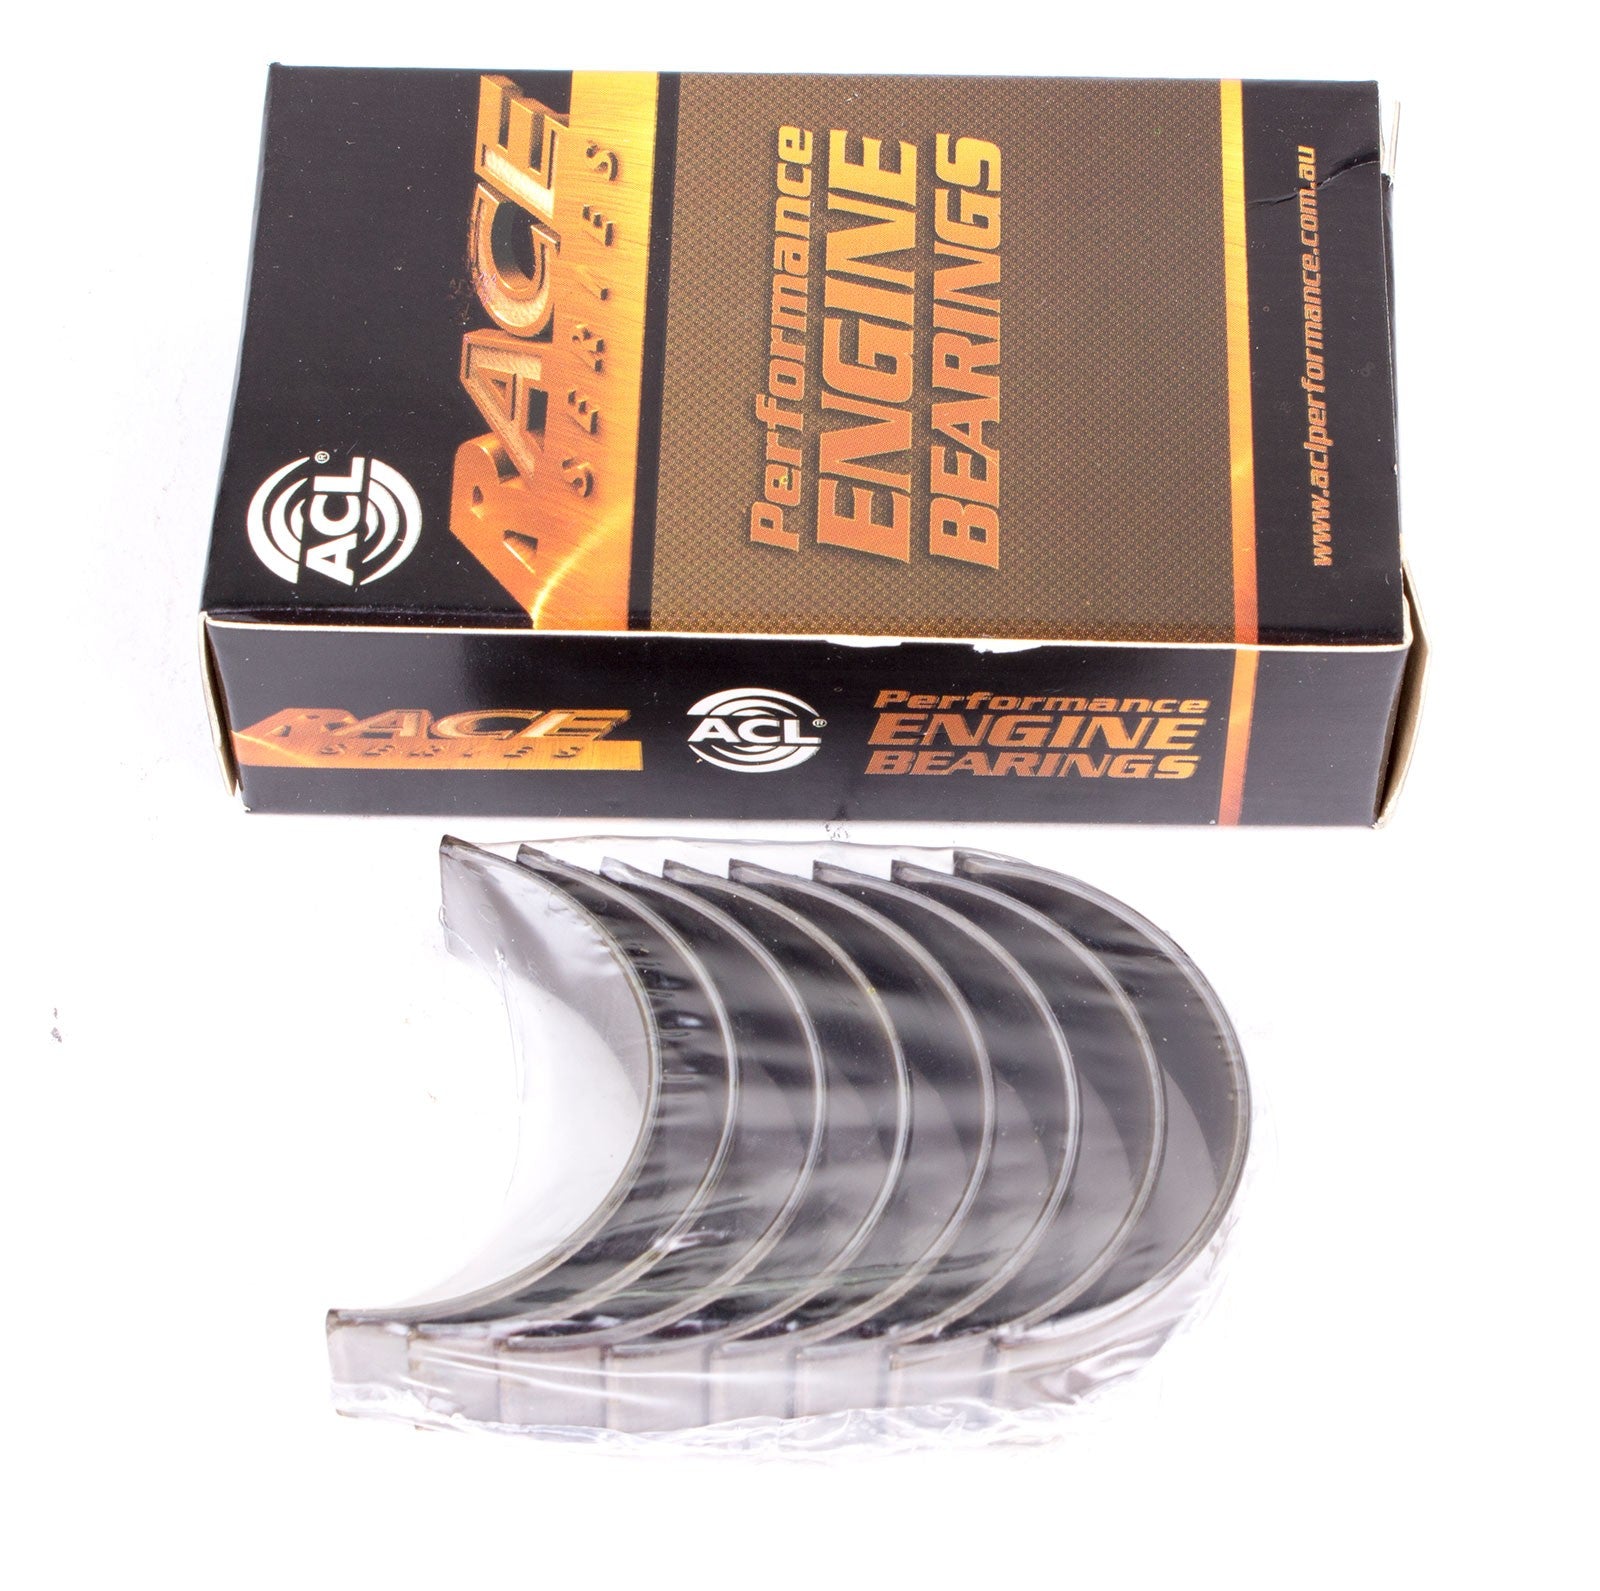 ACL 5M590H-01 Main bearing set (ACL Race Series) Photo-0 